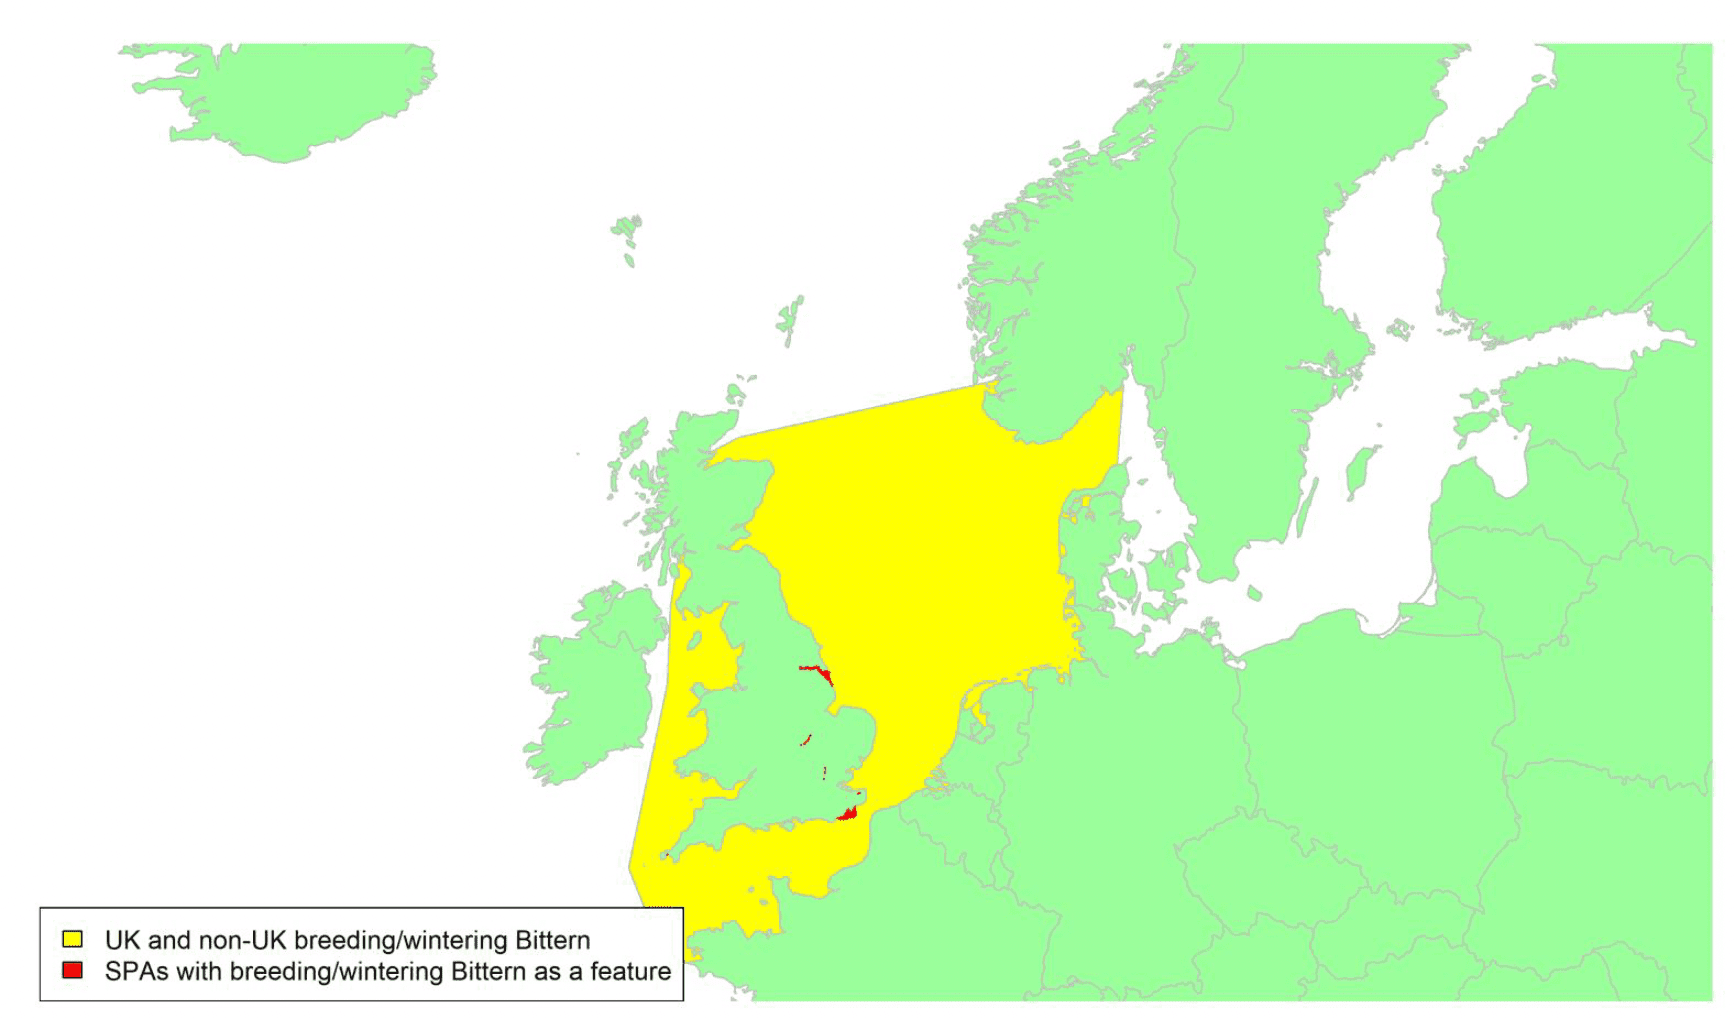 Map of North West Europe showing migratory routes and SPAs within the UK for Bittern as described in the text below.